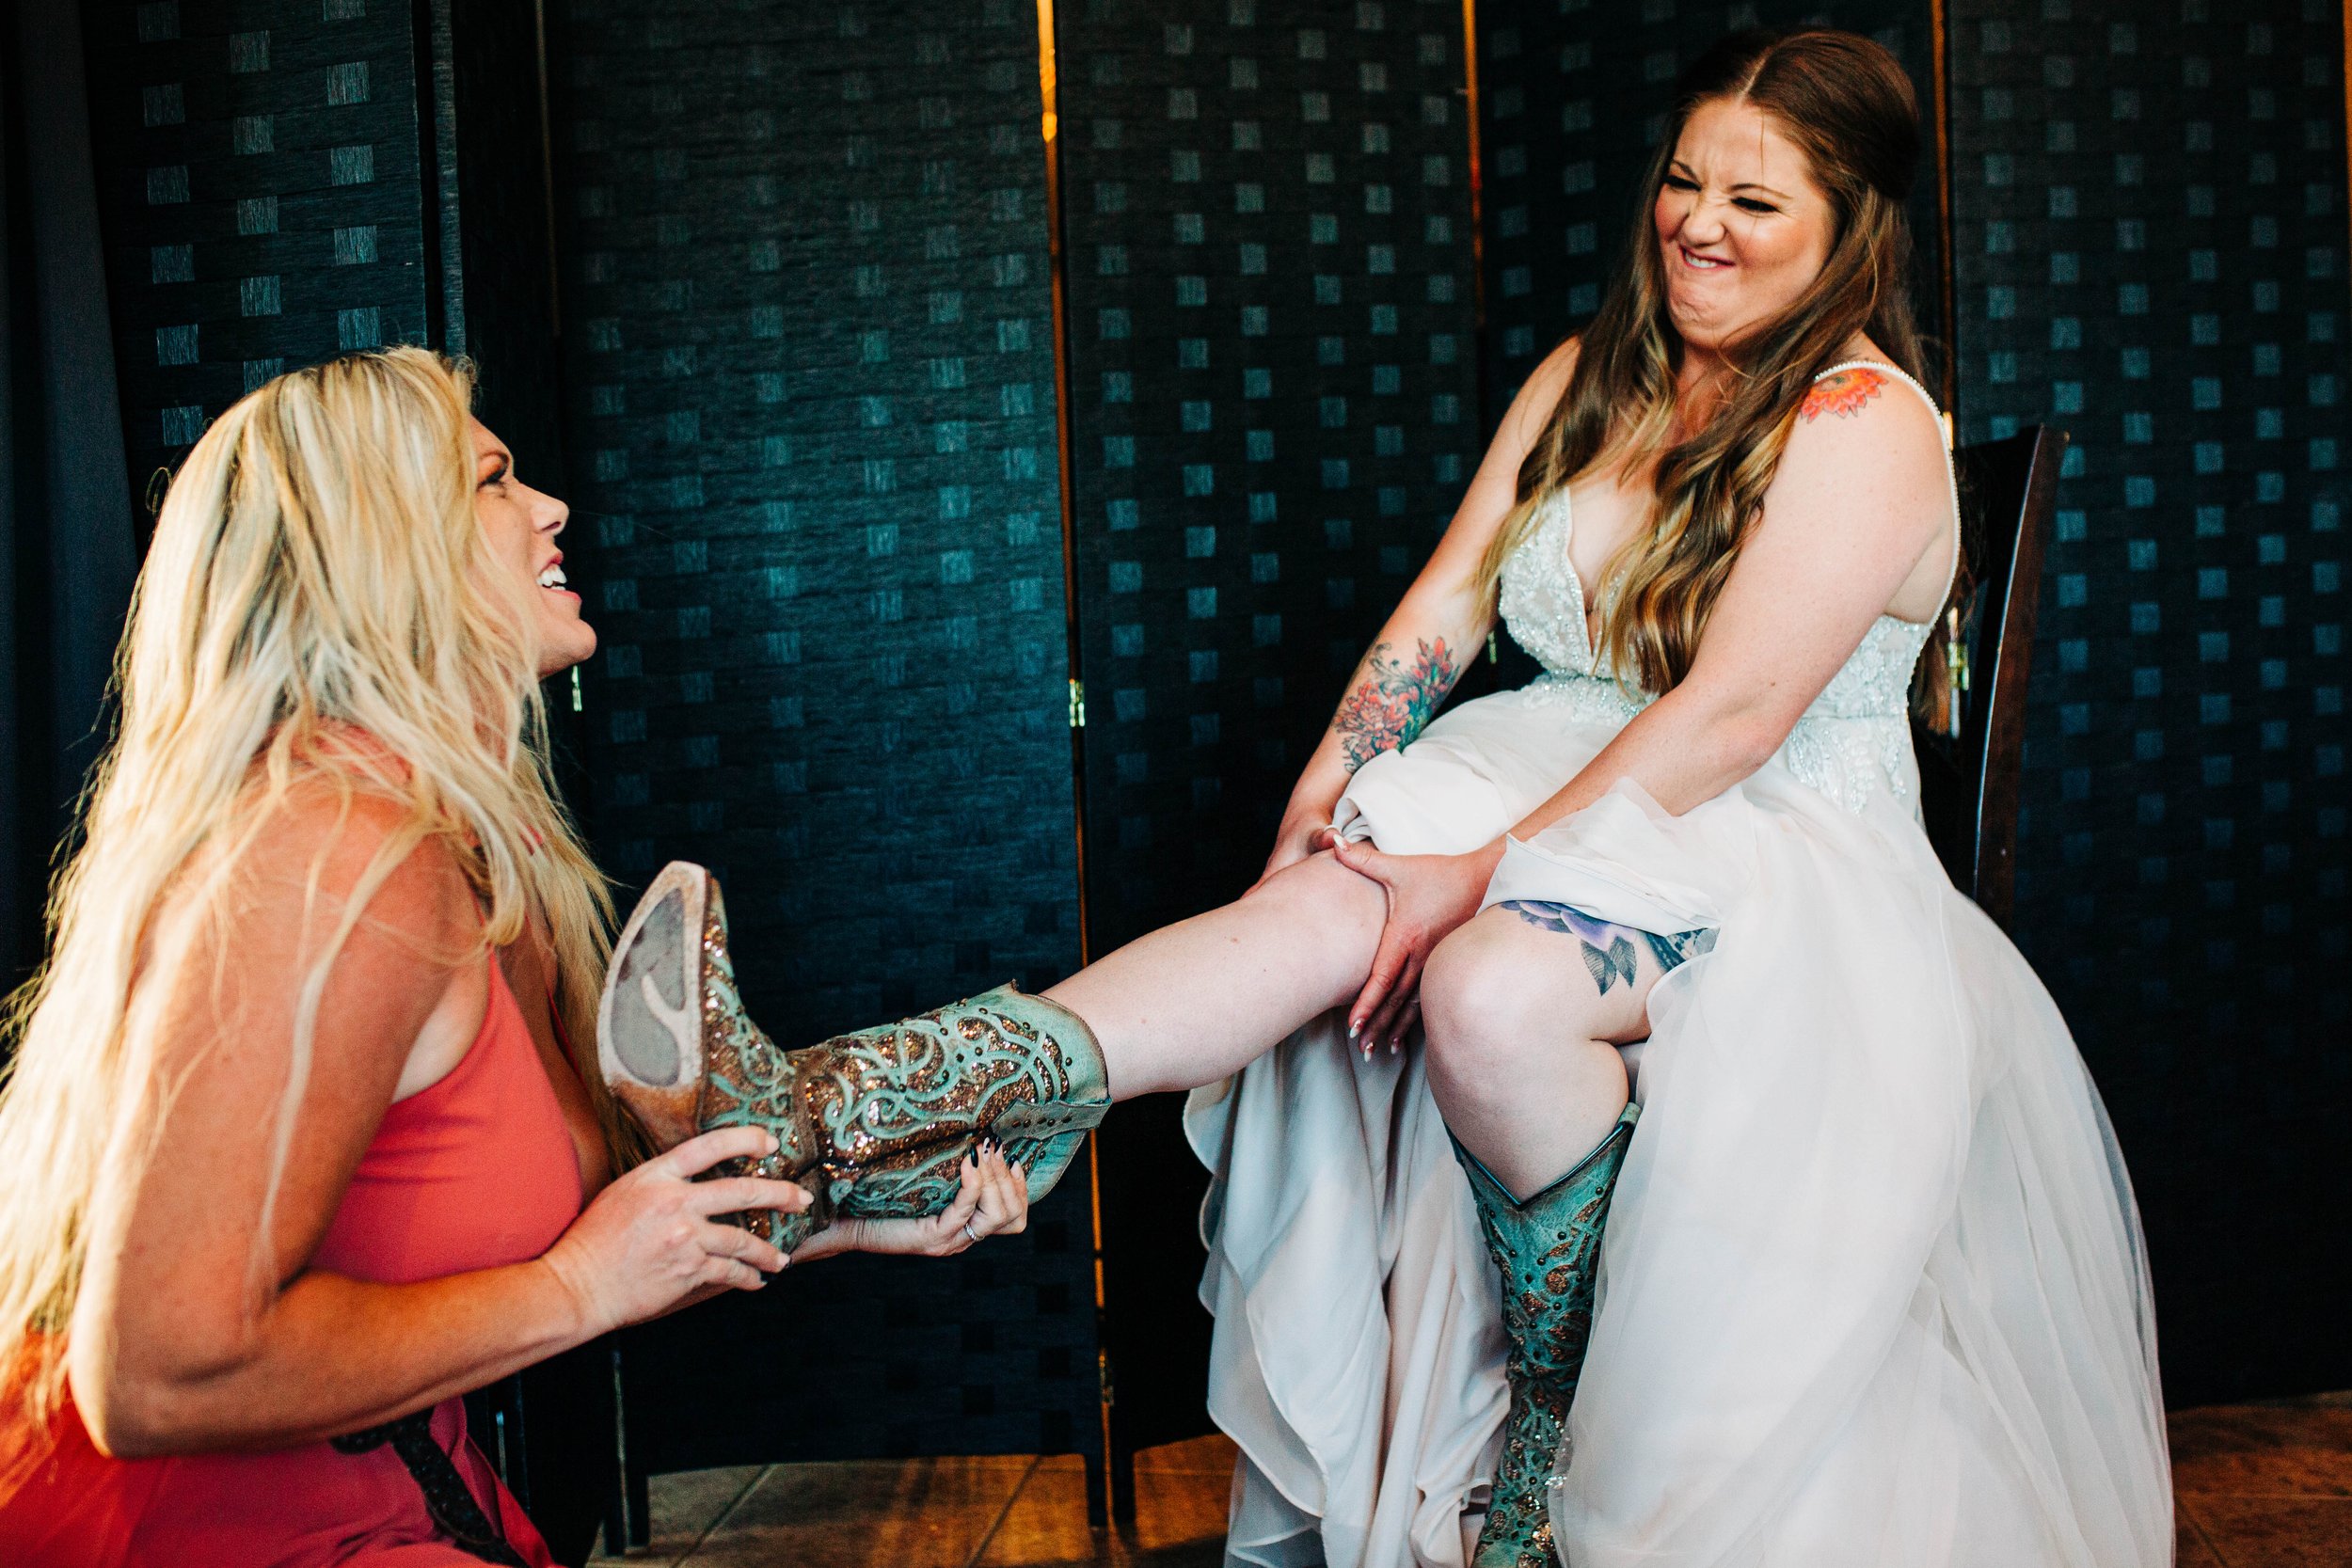 maid of honor putting shoes on bride.jpg